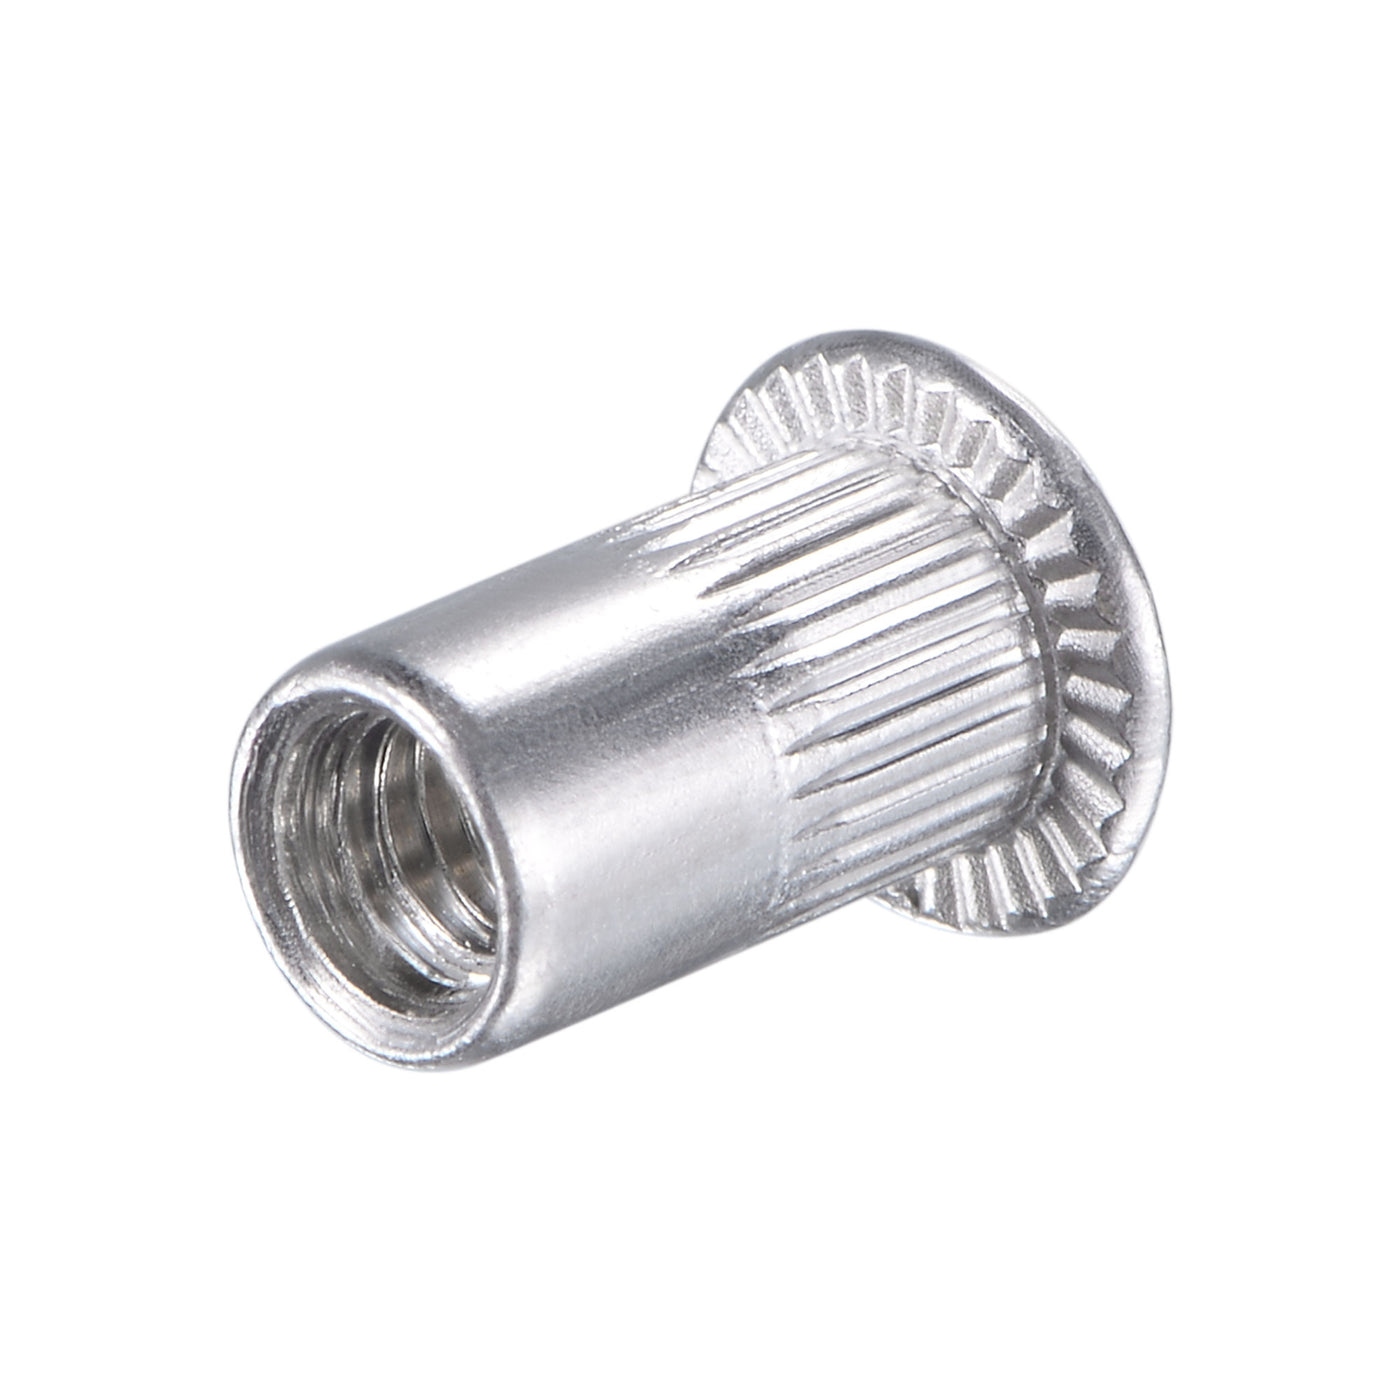 uxcell Uxcell Rivet Nuts Alloy Knurled Flat Head Threaded Insert